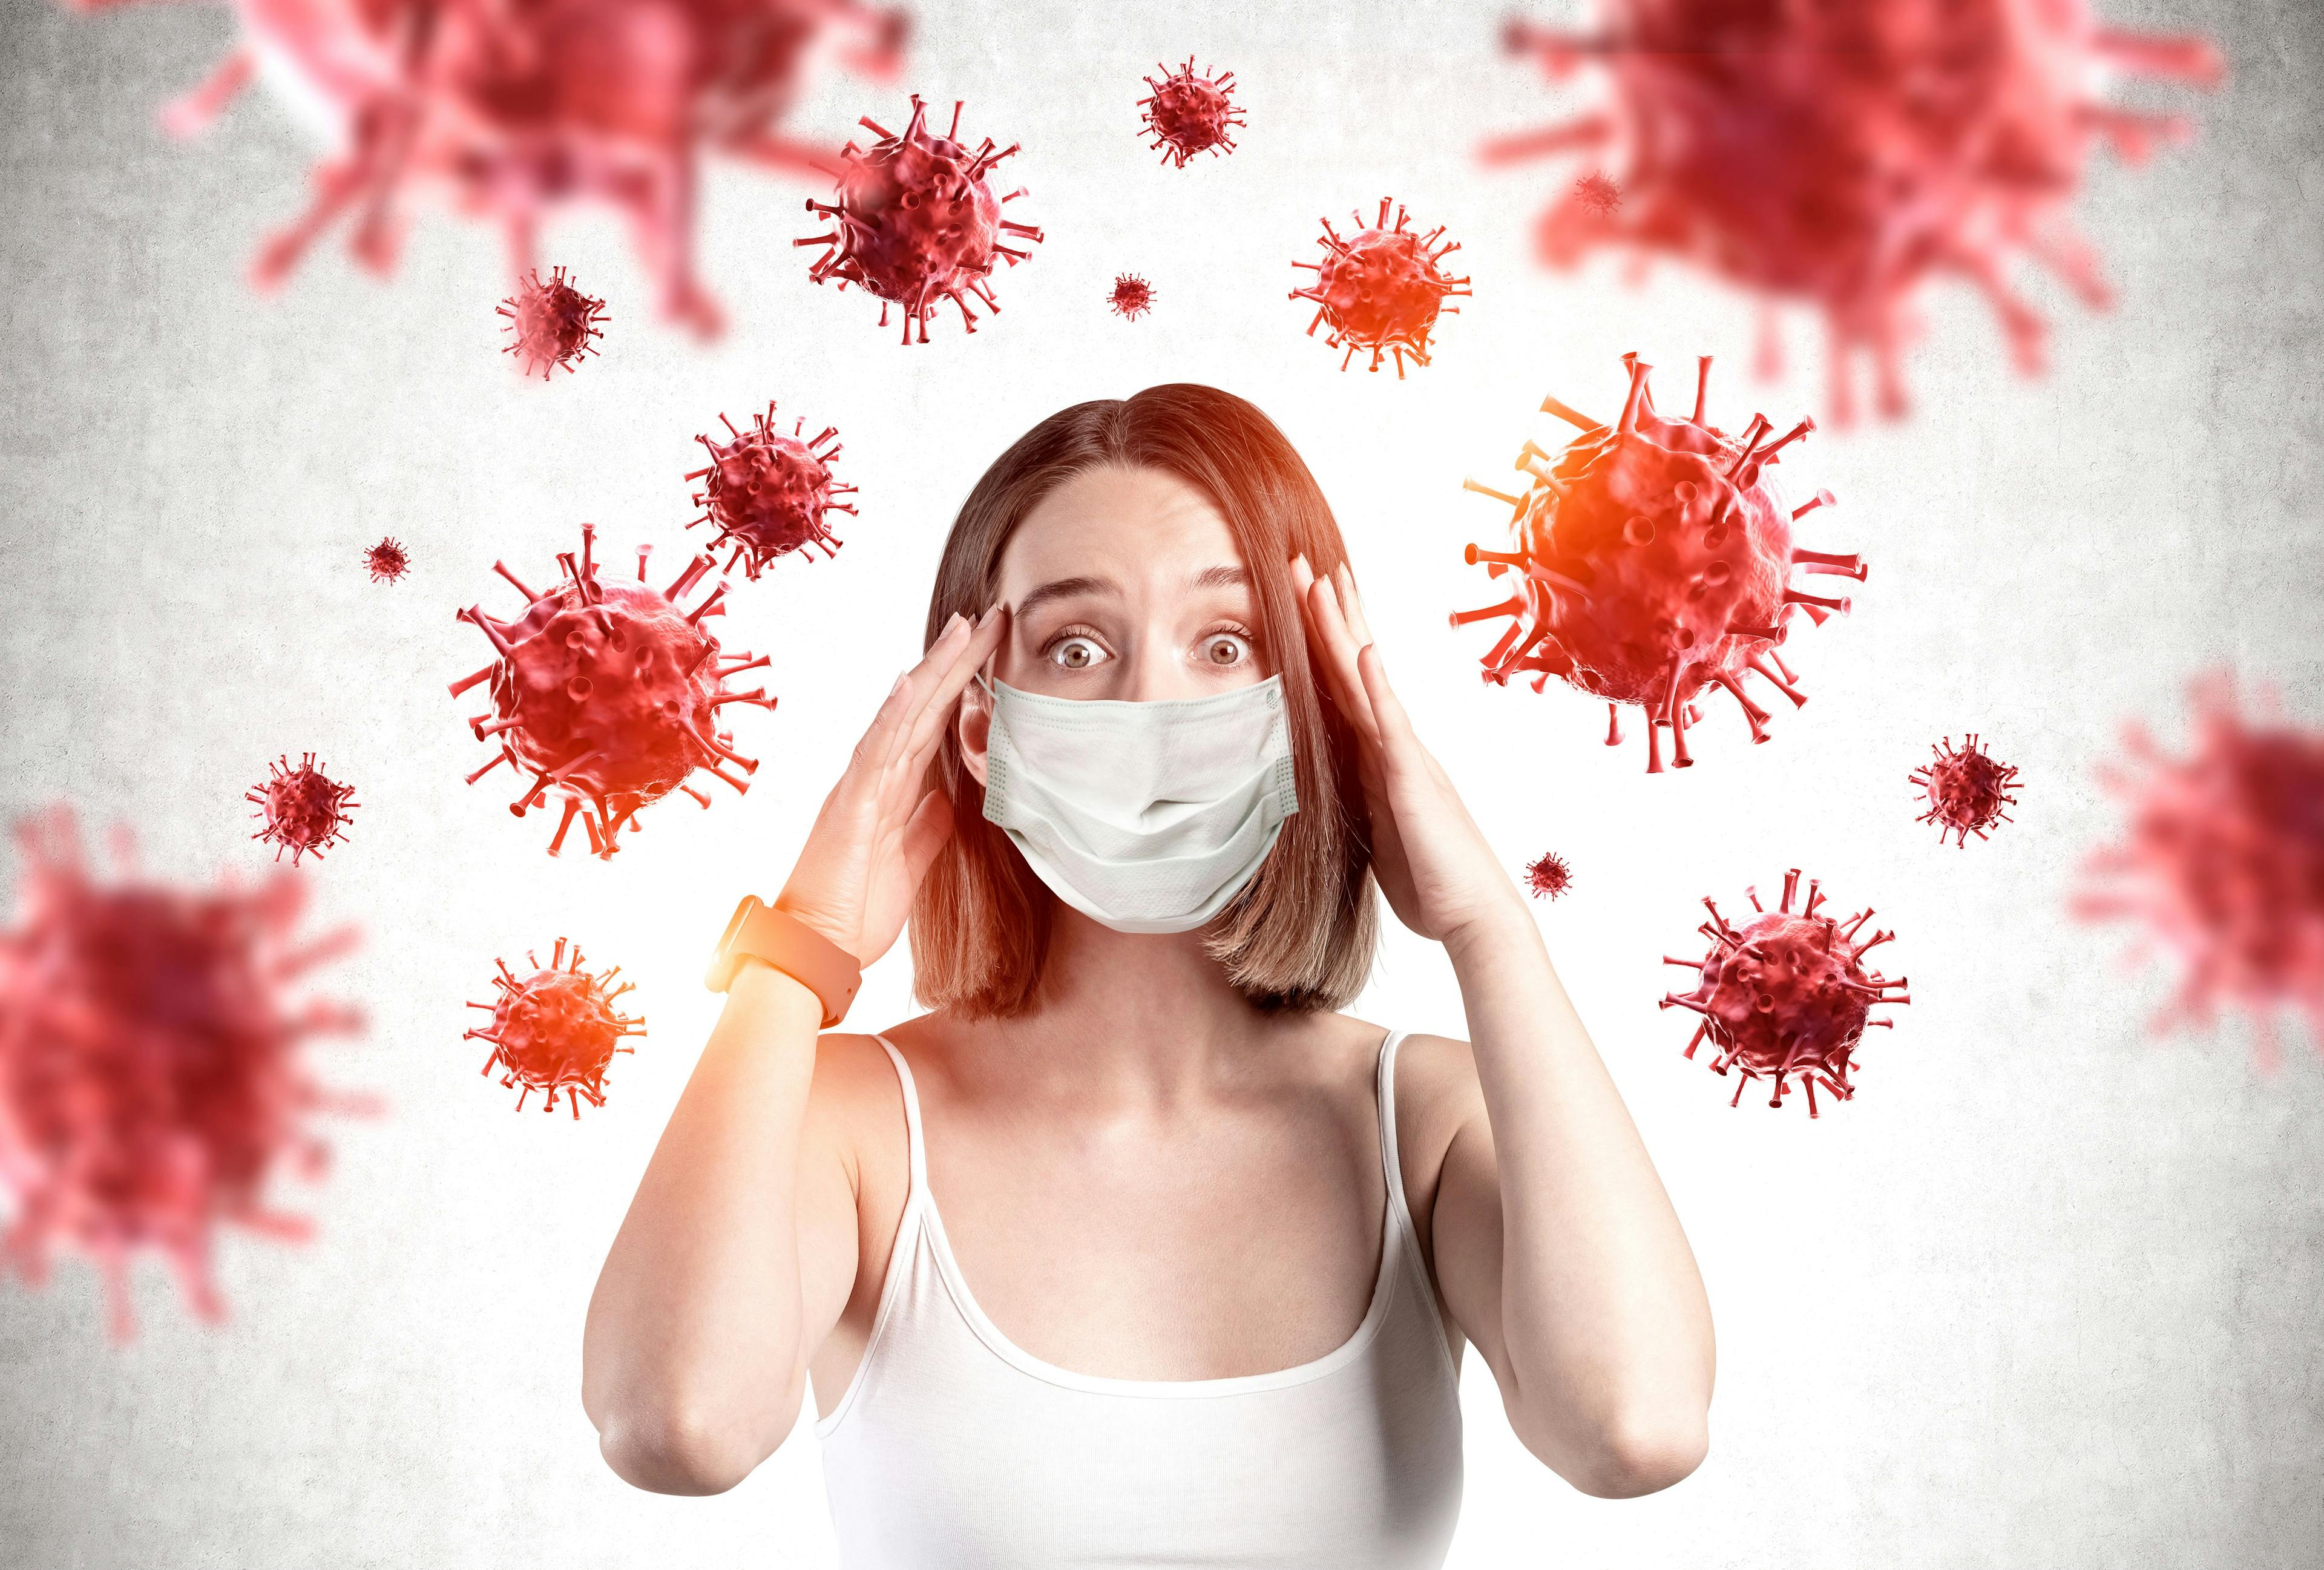 APA: Americans May be Experiencing “Secondary Crisis” due to Pandemic-related Stress